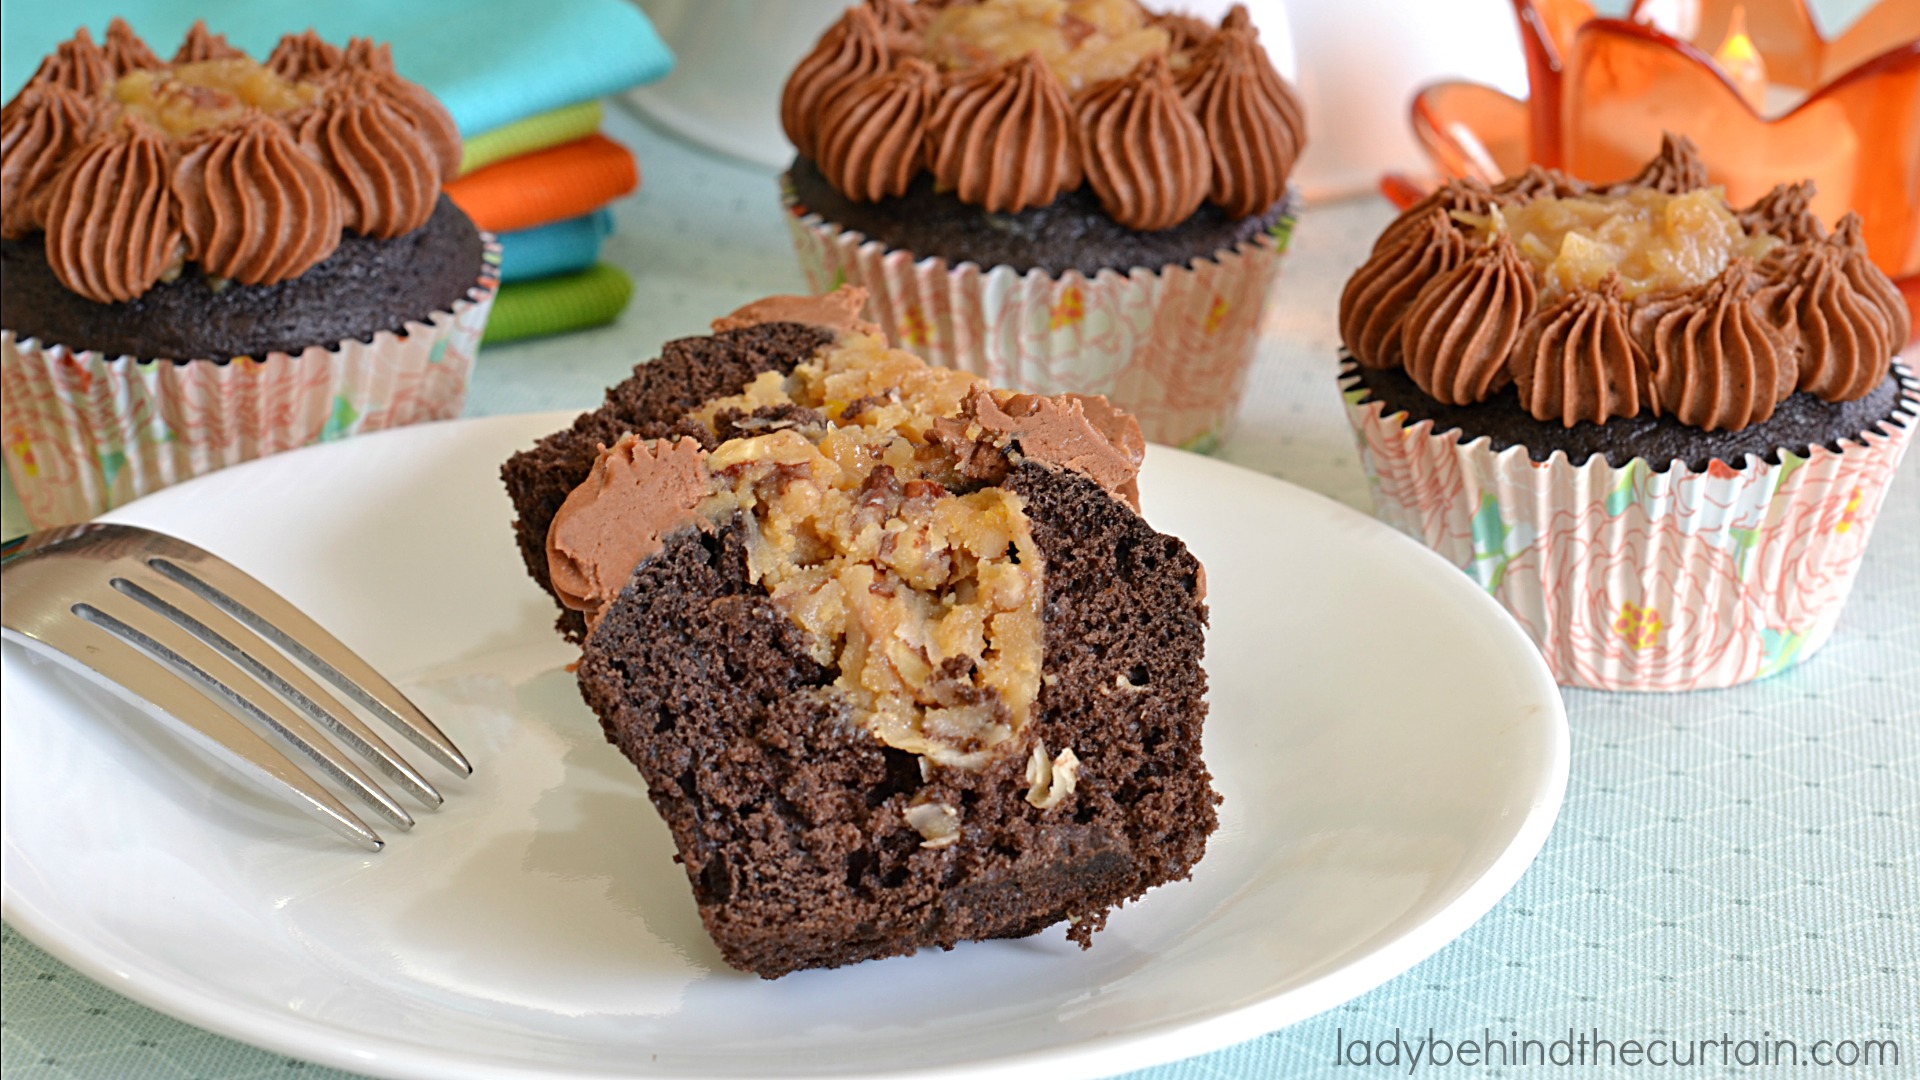 German Chocolate Cupcakes | A deep chocolate cupcake filled with the delicious coconut frosting that we all love along with a creamy butter chocolate frosting.  The perfect chocolate cupcake!